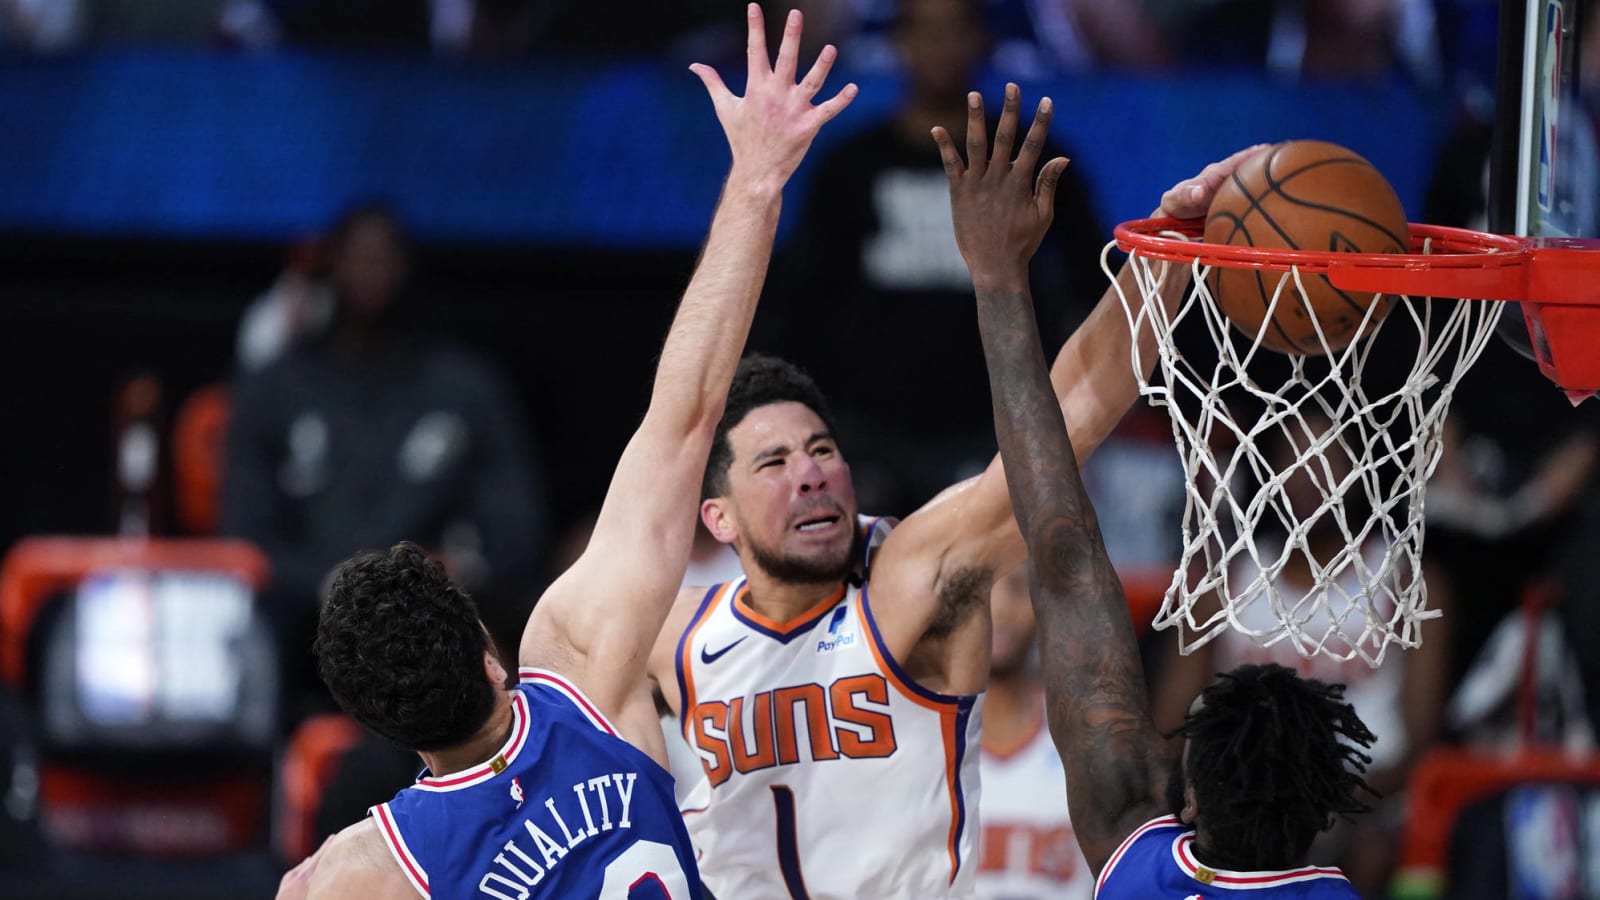 NBA world reacts to Devin Booker posterizing all of Philadelphia